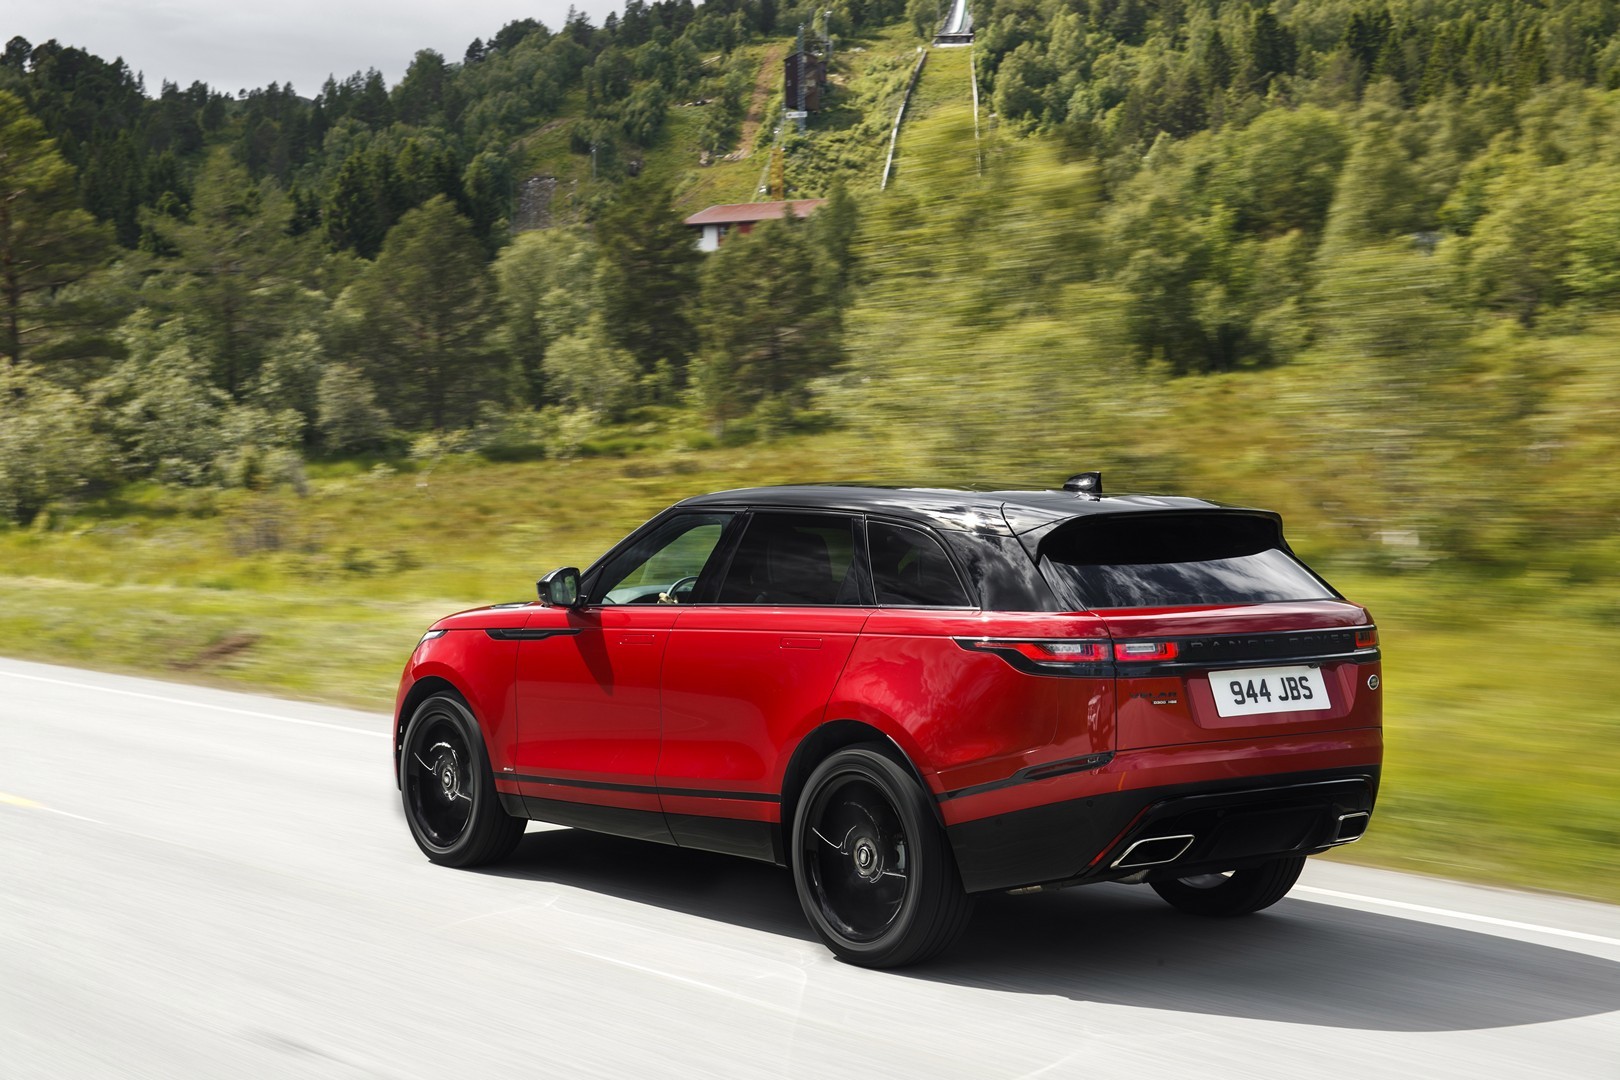 The Red Suv You Want Range Rover Velar R Dynamic Hse Black